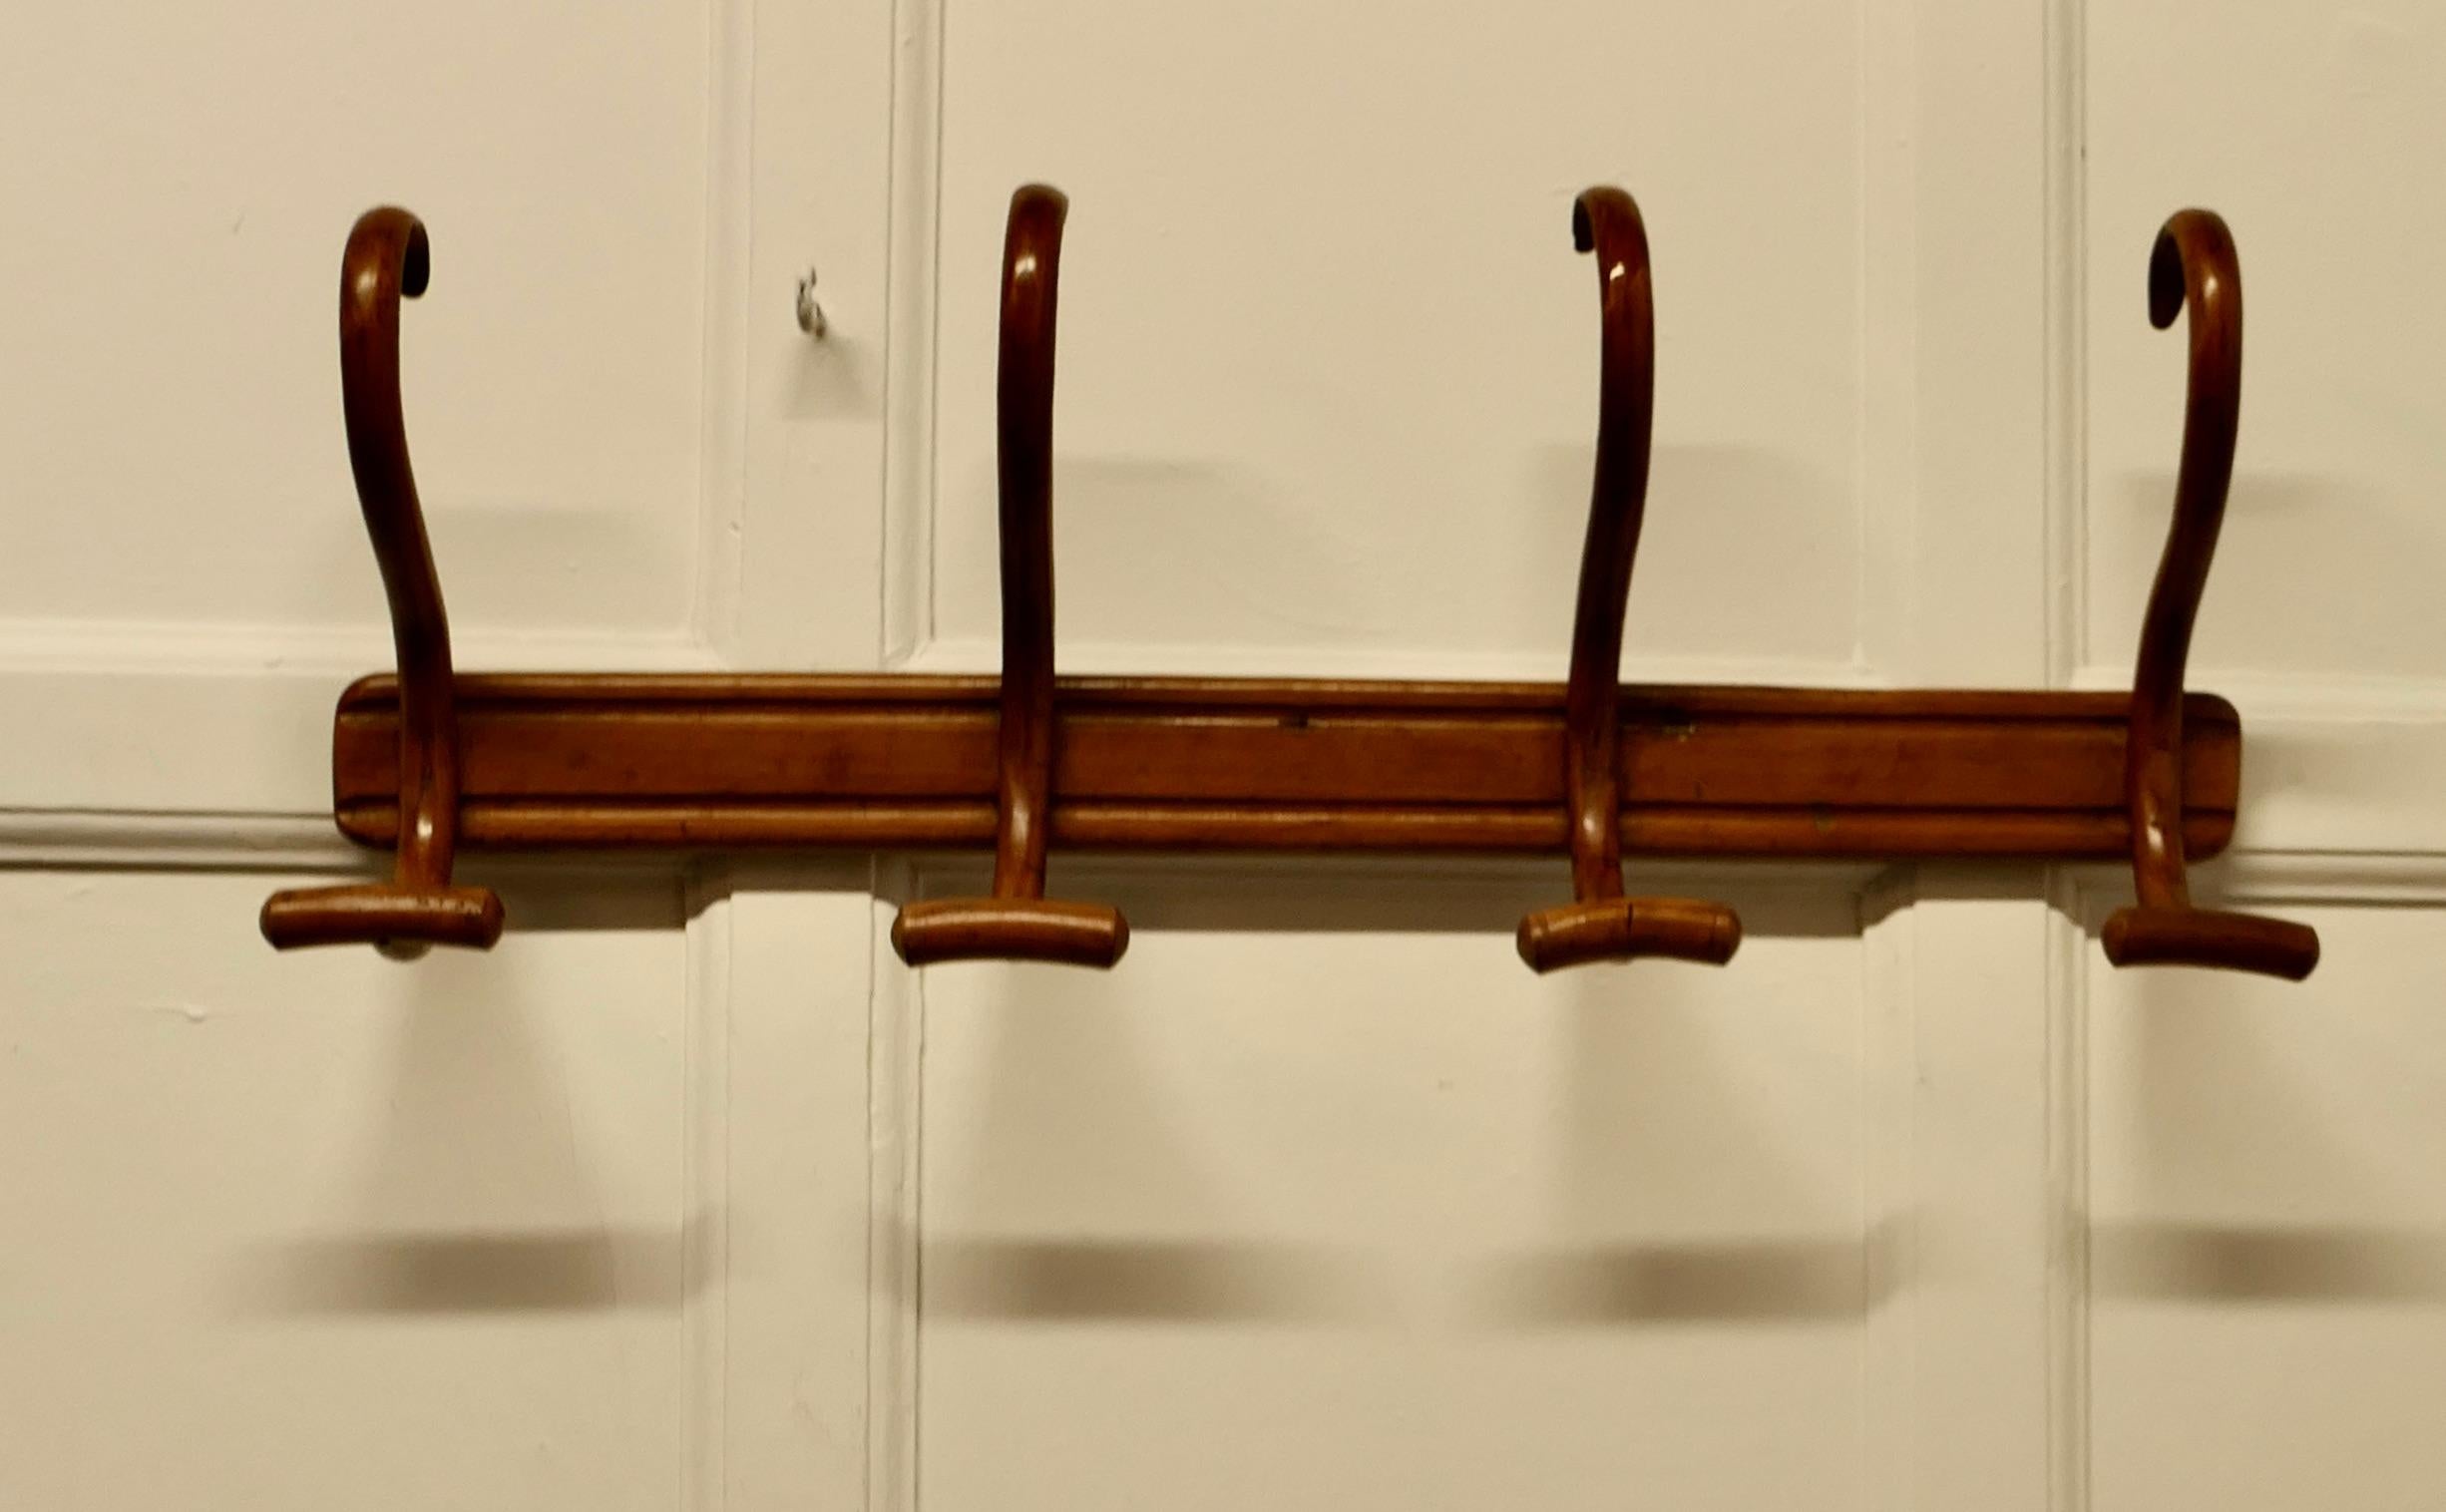 French Turned Golden Beech Hat and Coat Rack

This is a very attractive piece it is a wall hanging piece, it has 4 large swan neck bent wood double hooks it would make a good hall piece where space is limited
This is a good looking piece with a